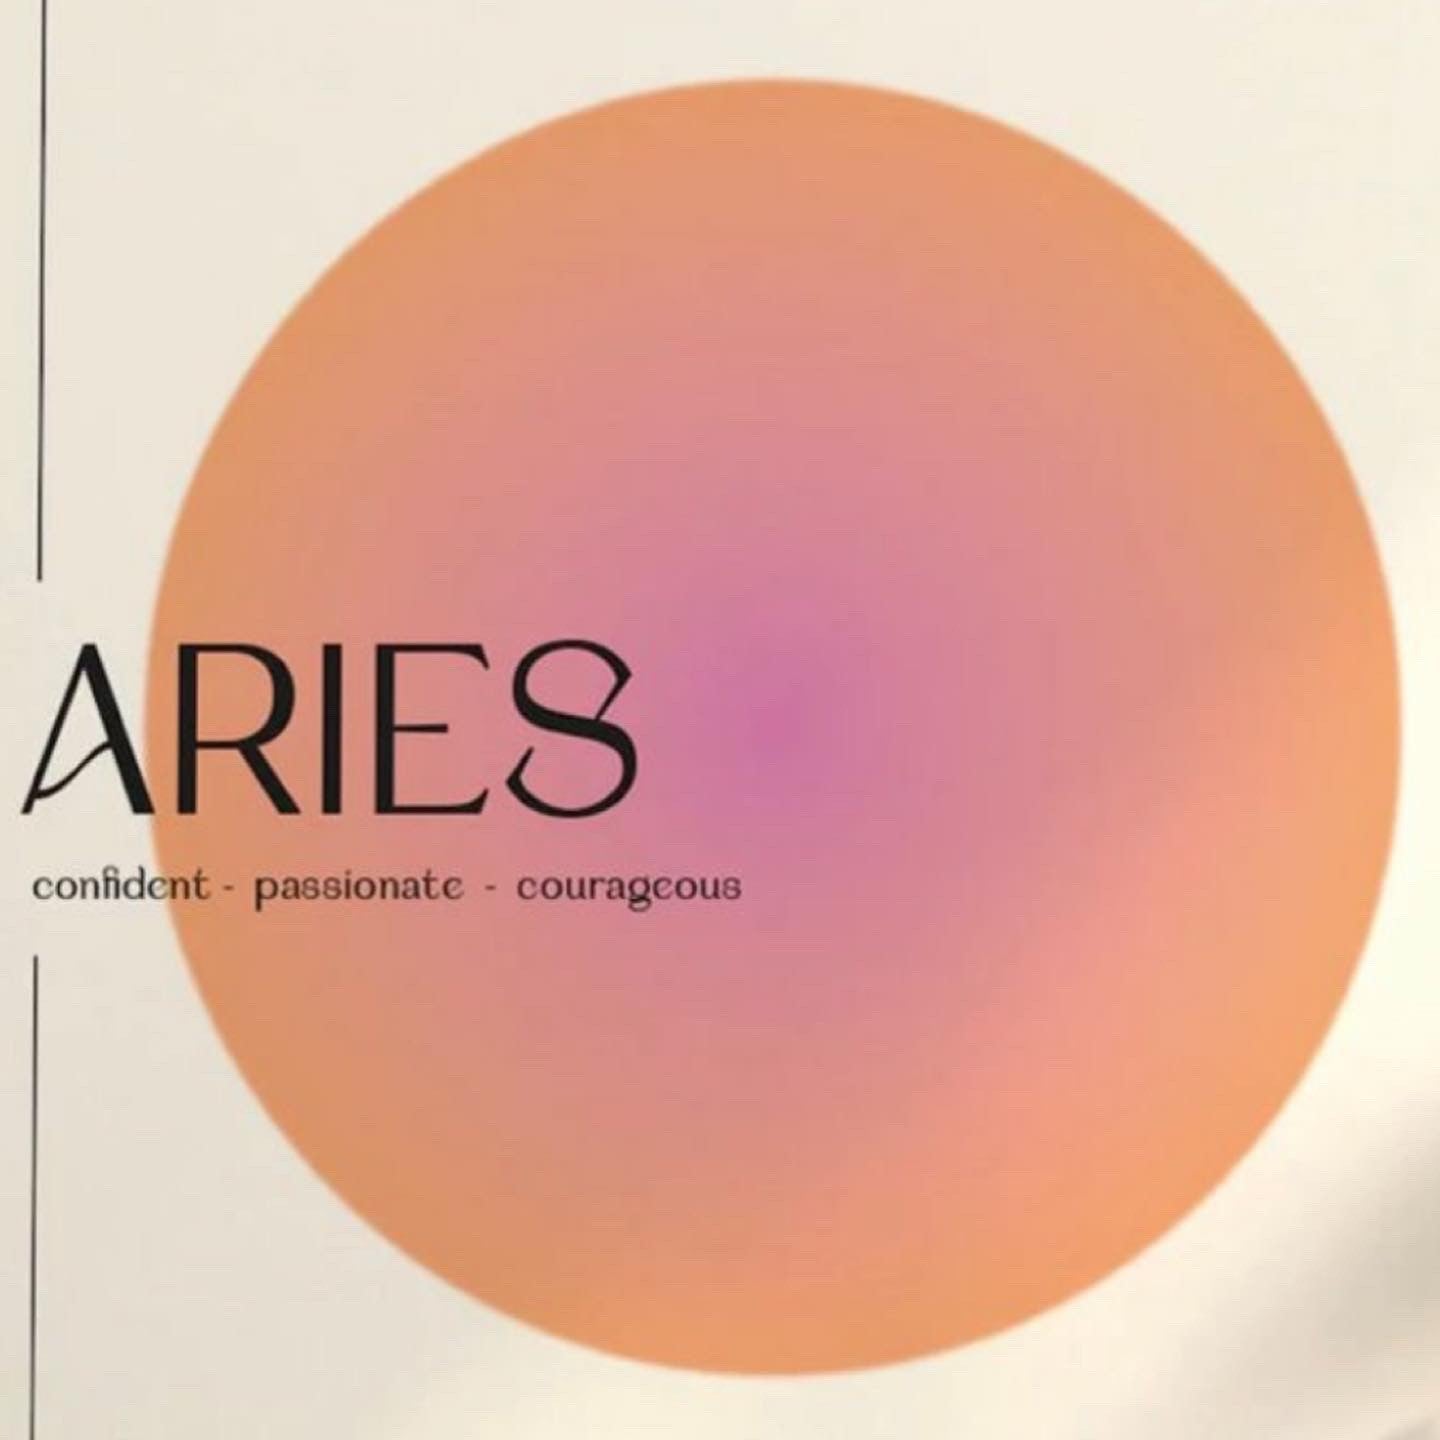 Aries Season The Start of the Zodiac Cycle calaessentials